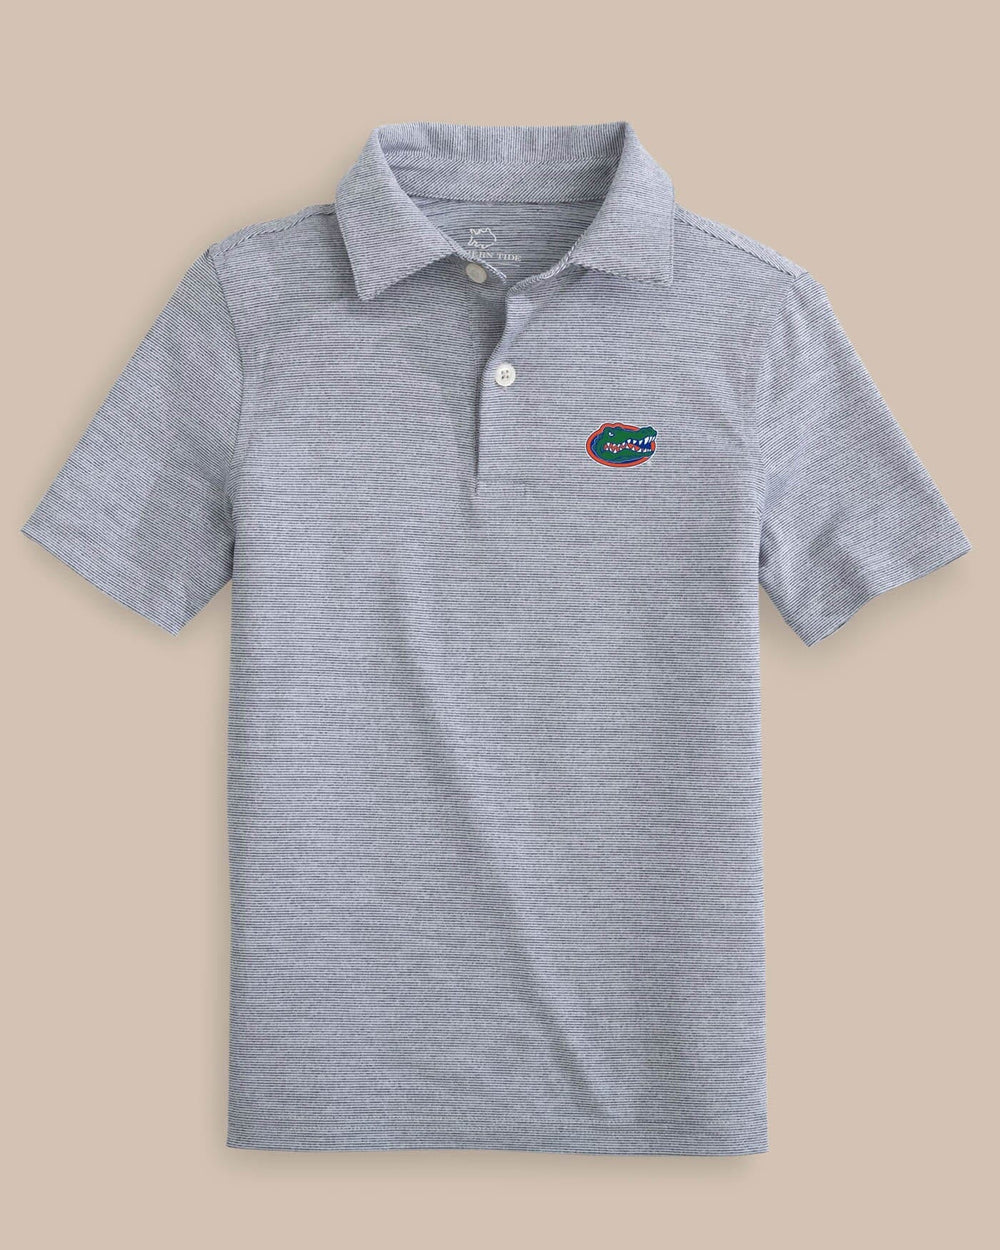 The front view of the Florida Gators Boys Driver Spacedye Performance Polo Shirt by Southern Tide - Navy